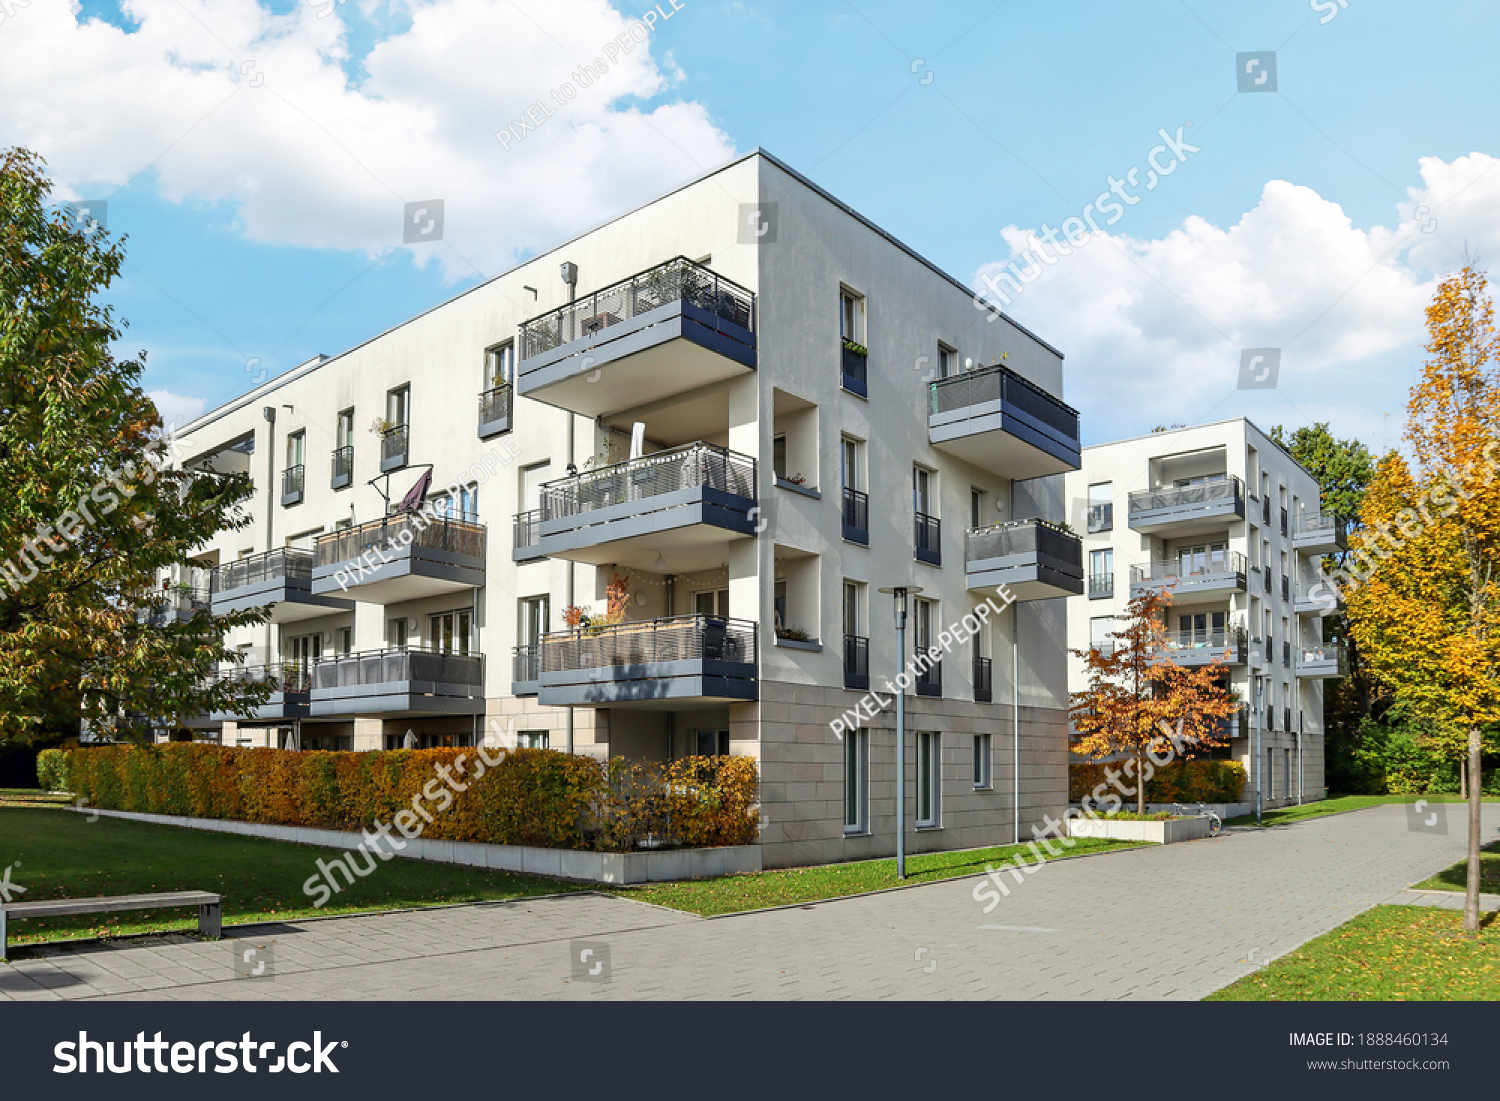 Residential area with ecological and sustainable green residential buildings, low-energy houses with apartments and green courtyard #1888460134